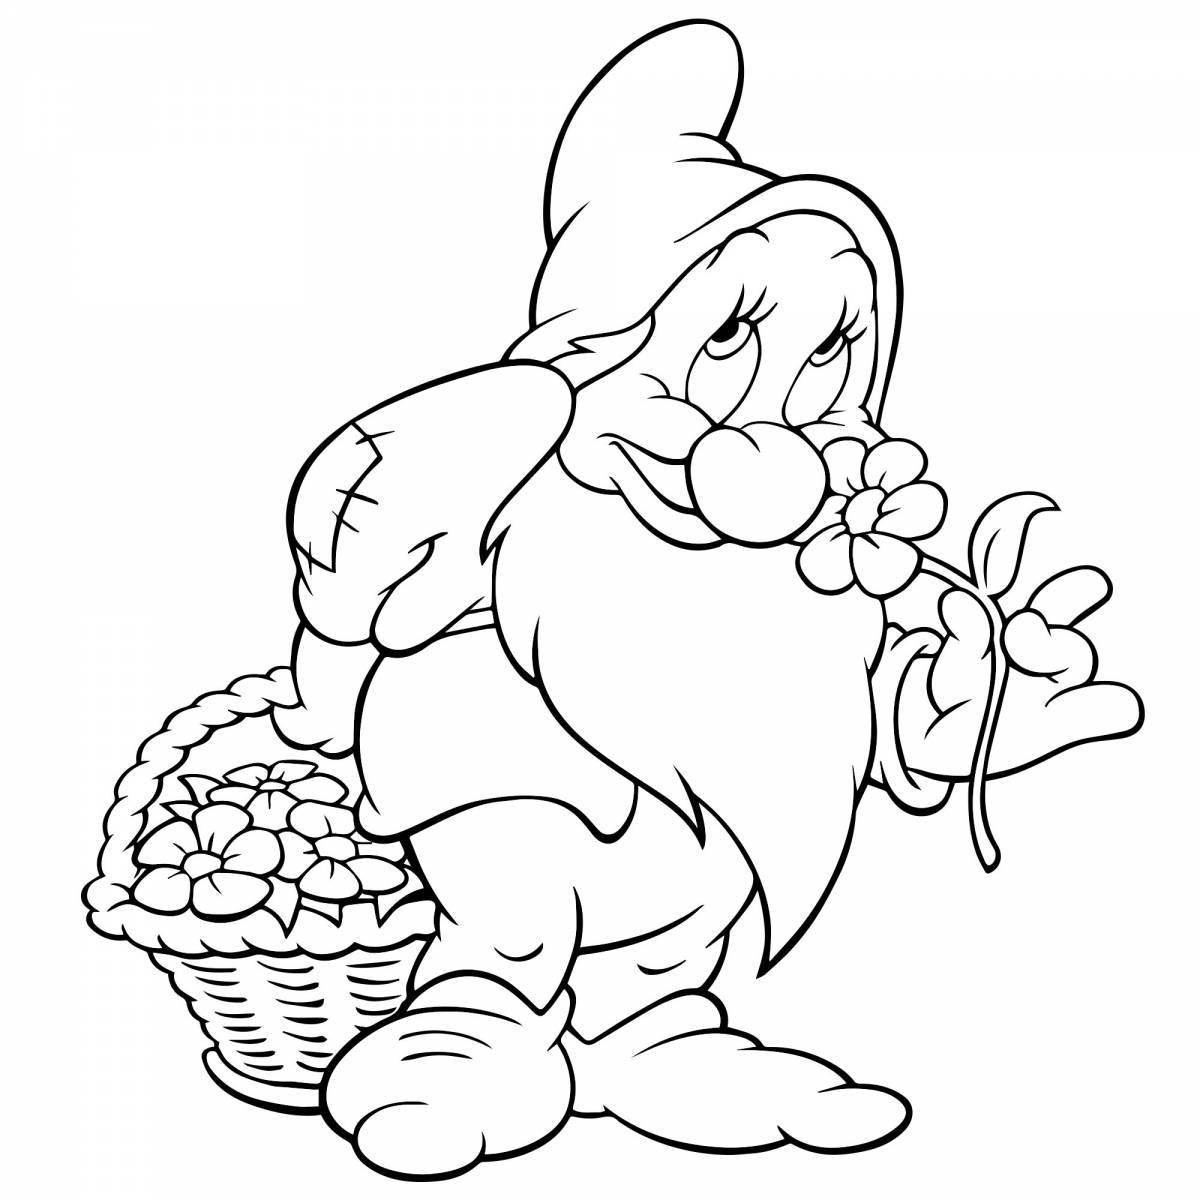 Colorful gnome coloring pages